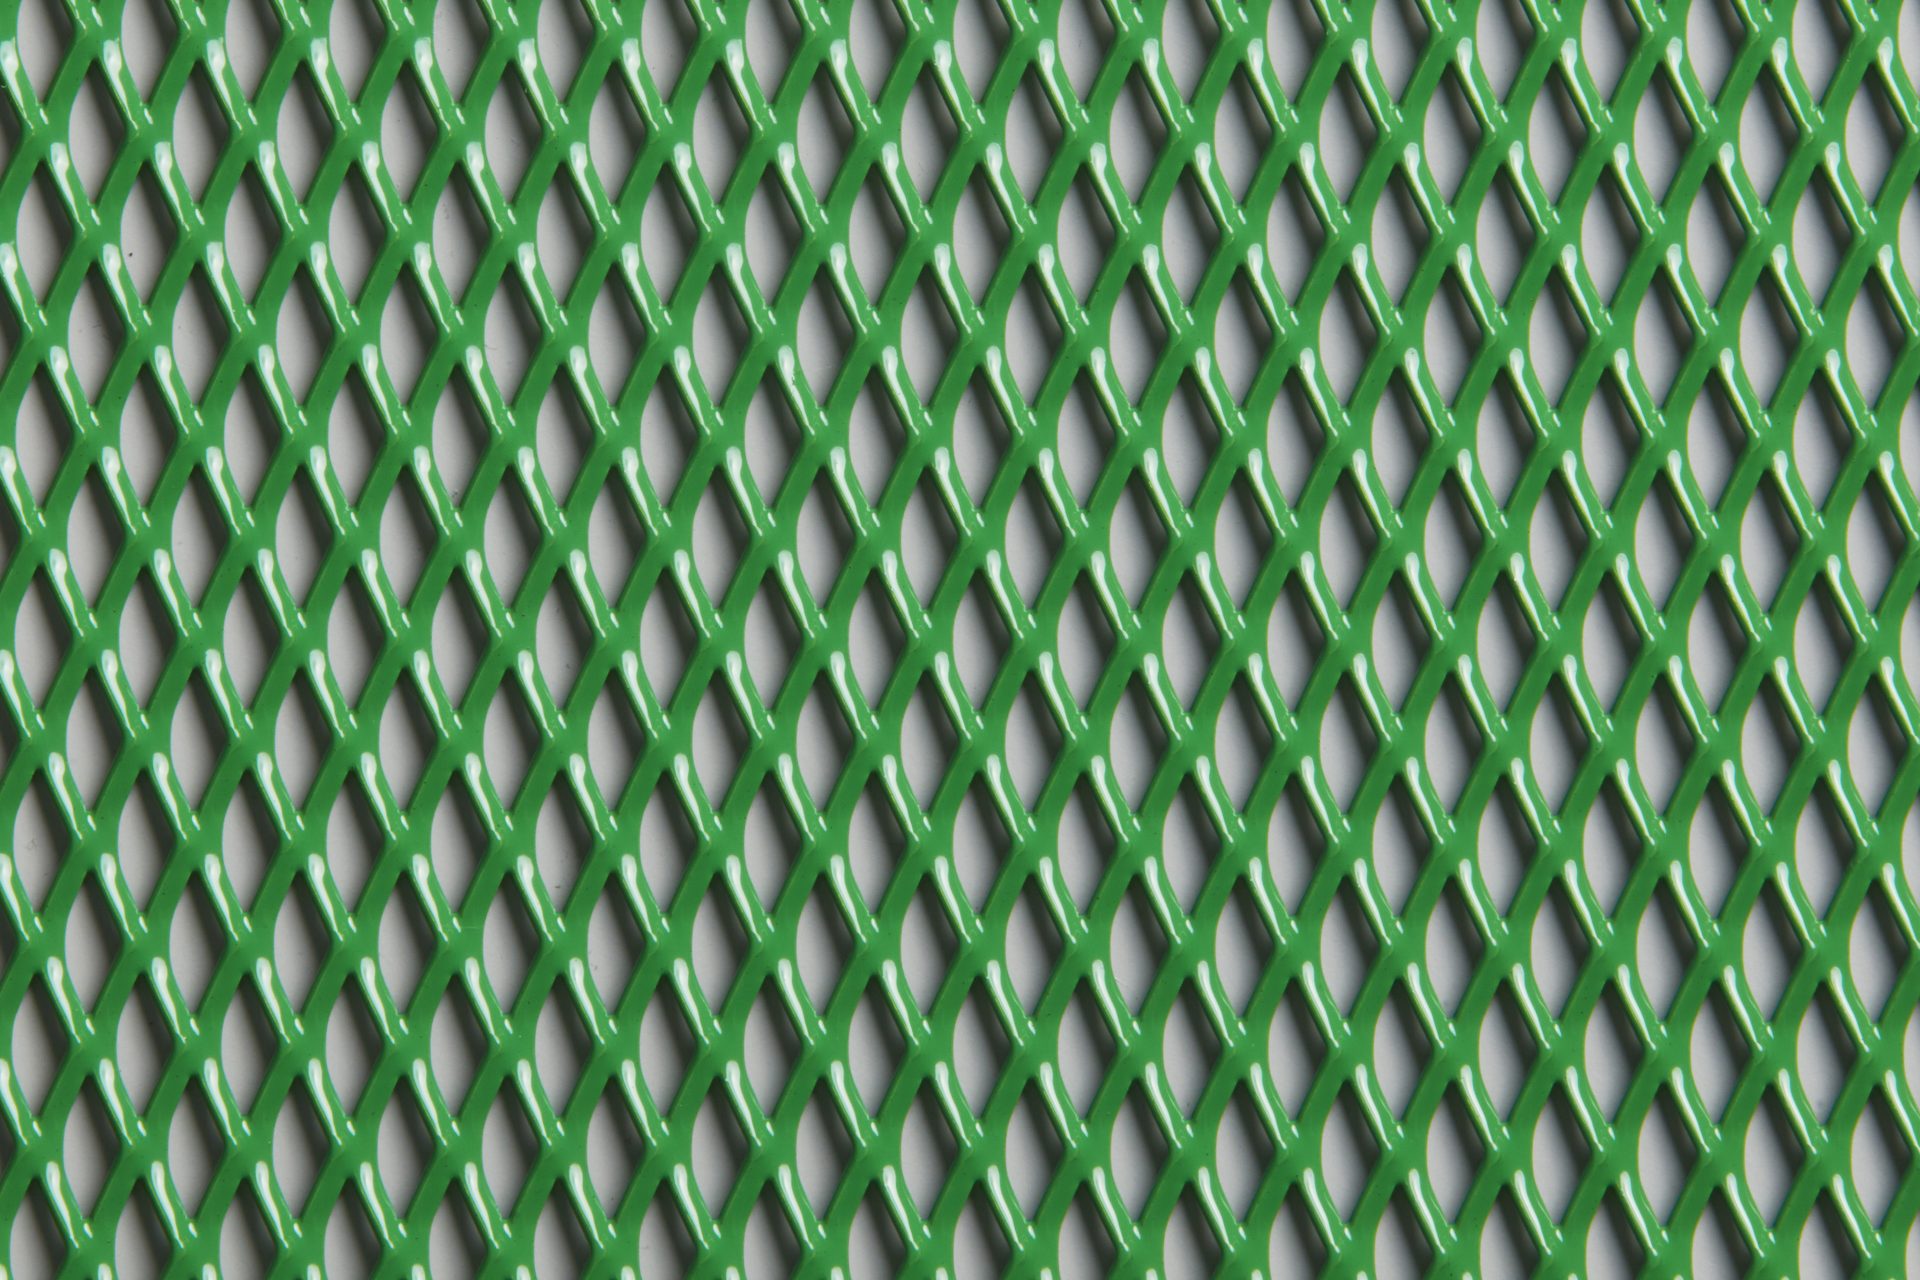 Zentia Ceiling Tile DecoMesh RB25 Face Pattern Green